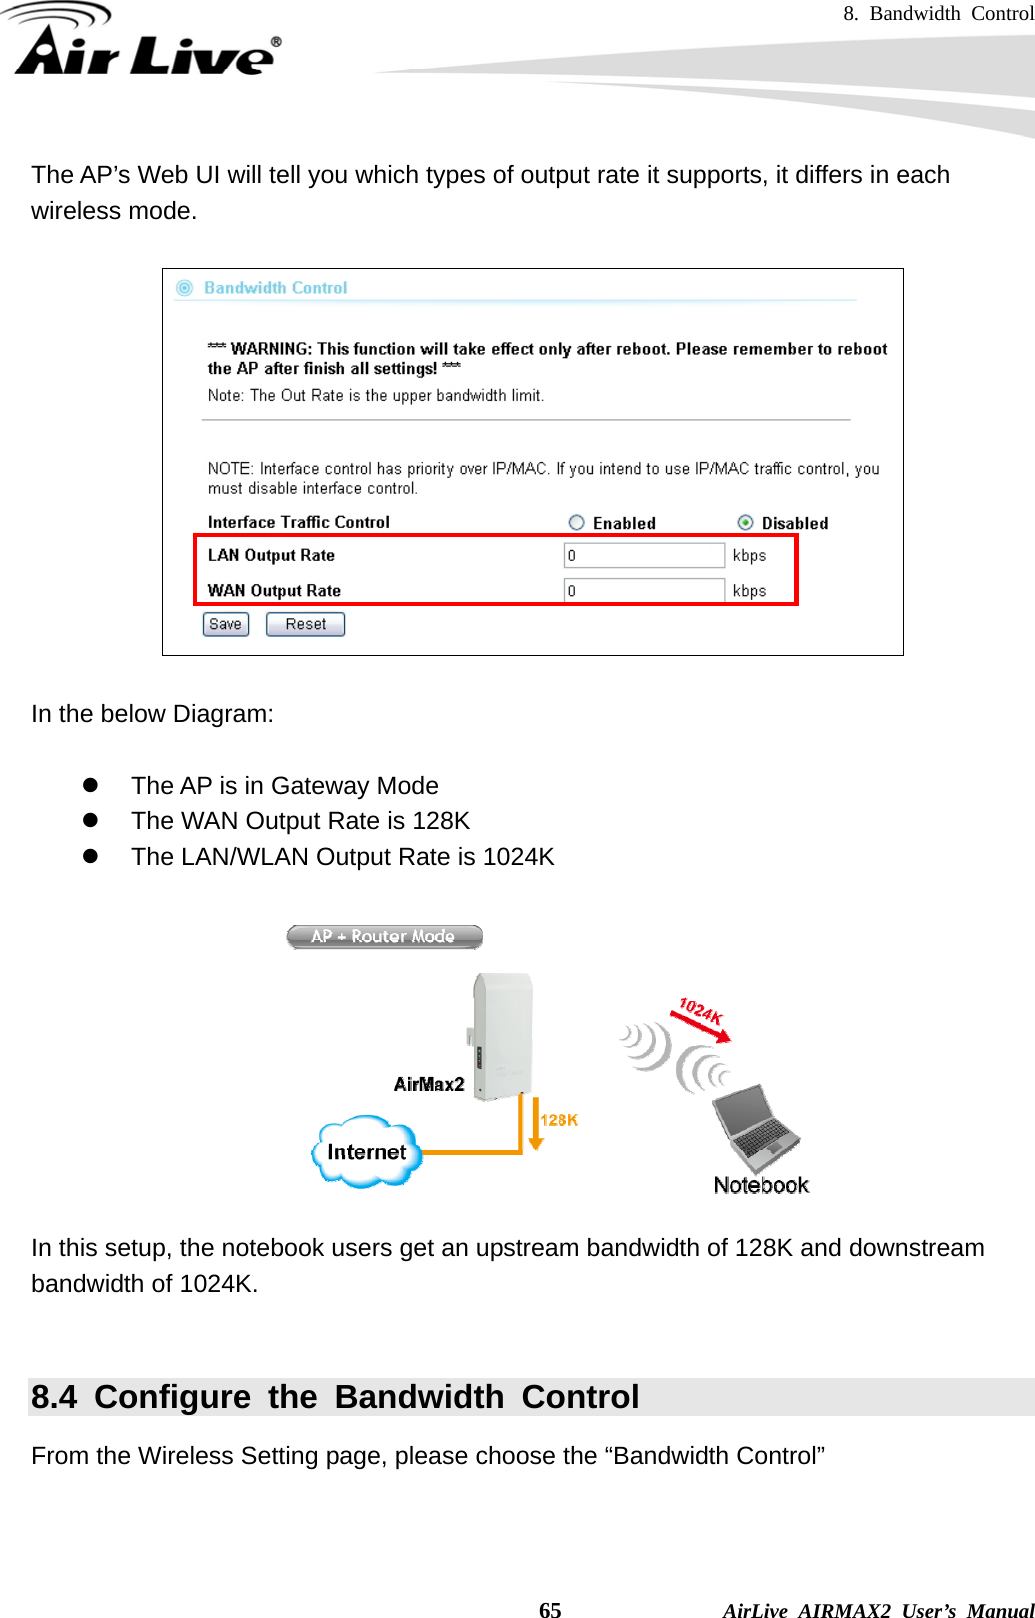 8. Bandwidth Control    65              AirLive AIRMAX2 User’s Manual The AP’s Web UI will tell you which types of output rate it supports, it differs in each wireless mode.    In the below Diagram:  z  The AP is in Gateway Mode z  The WAN Output Rate is 128K z  The LAN/WLAN Output Rate is 1024K   In this setup, the notebook users get an upstream bandwidth of 128K and downstream bandwidth of 1024K.  8.4 Configure the Bandwidth Control From the Wireless Setting page, please choose the “Bandwidth Control”    